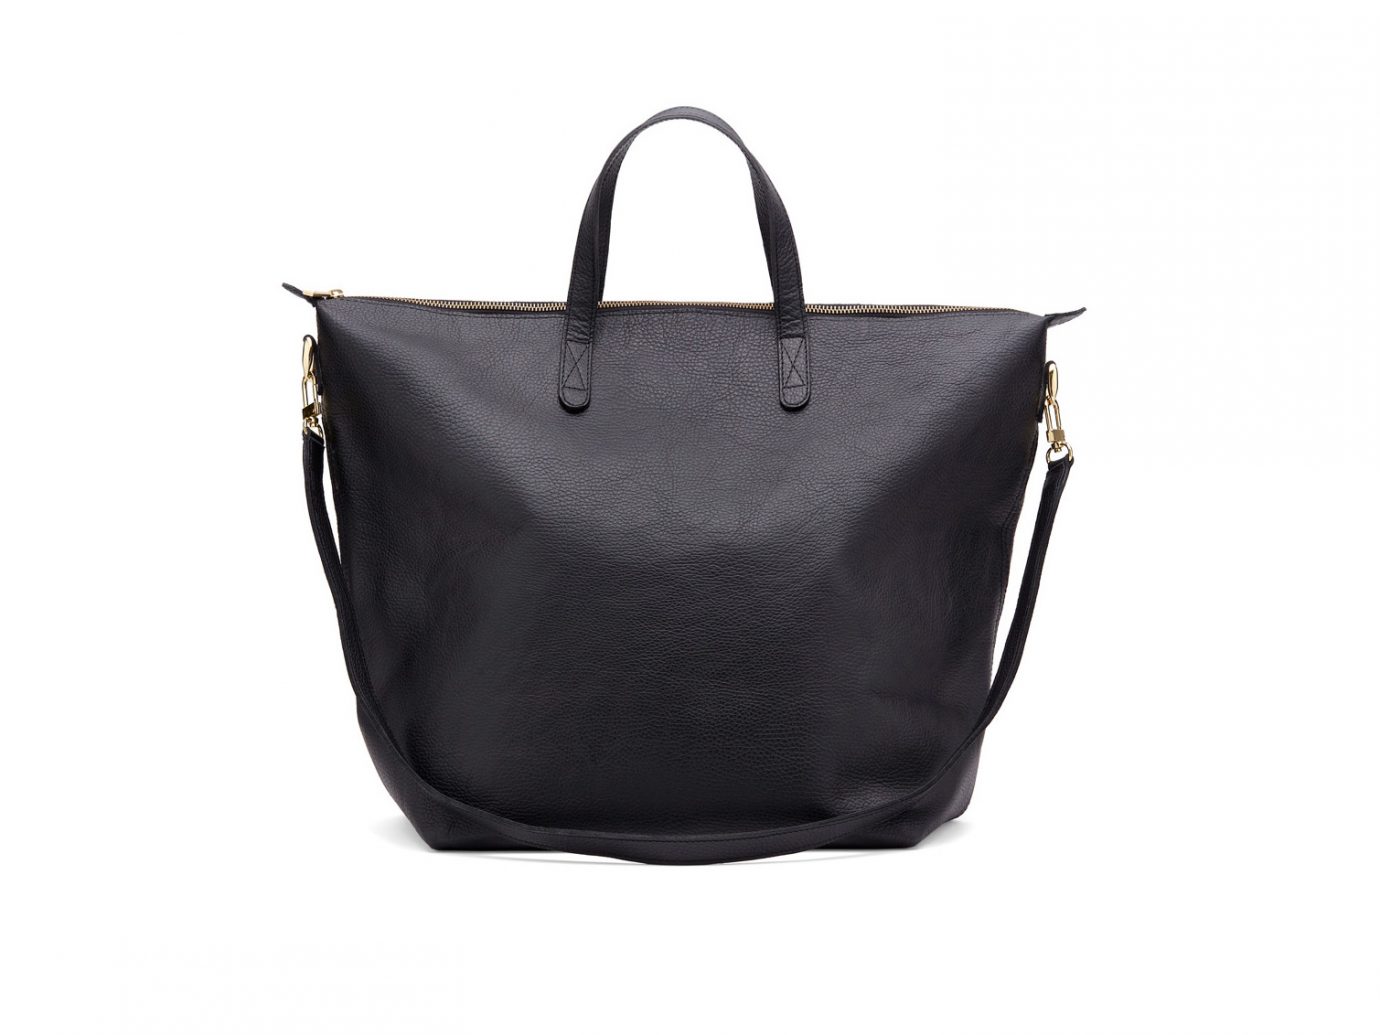 Cuyana Oversized Carryall Tote